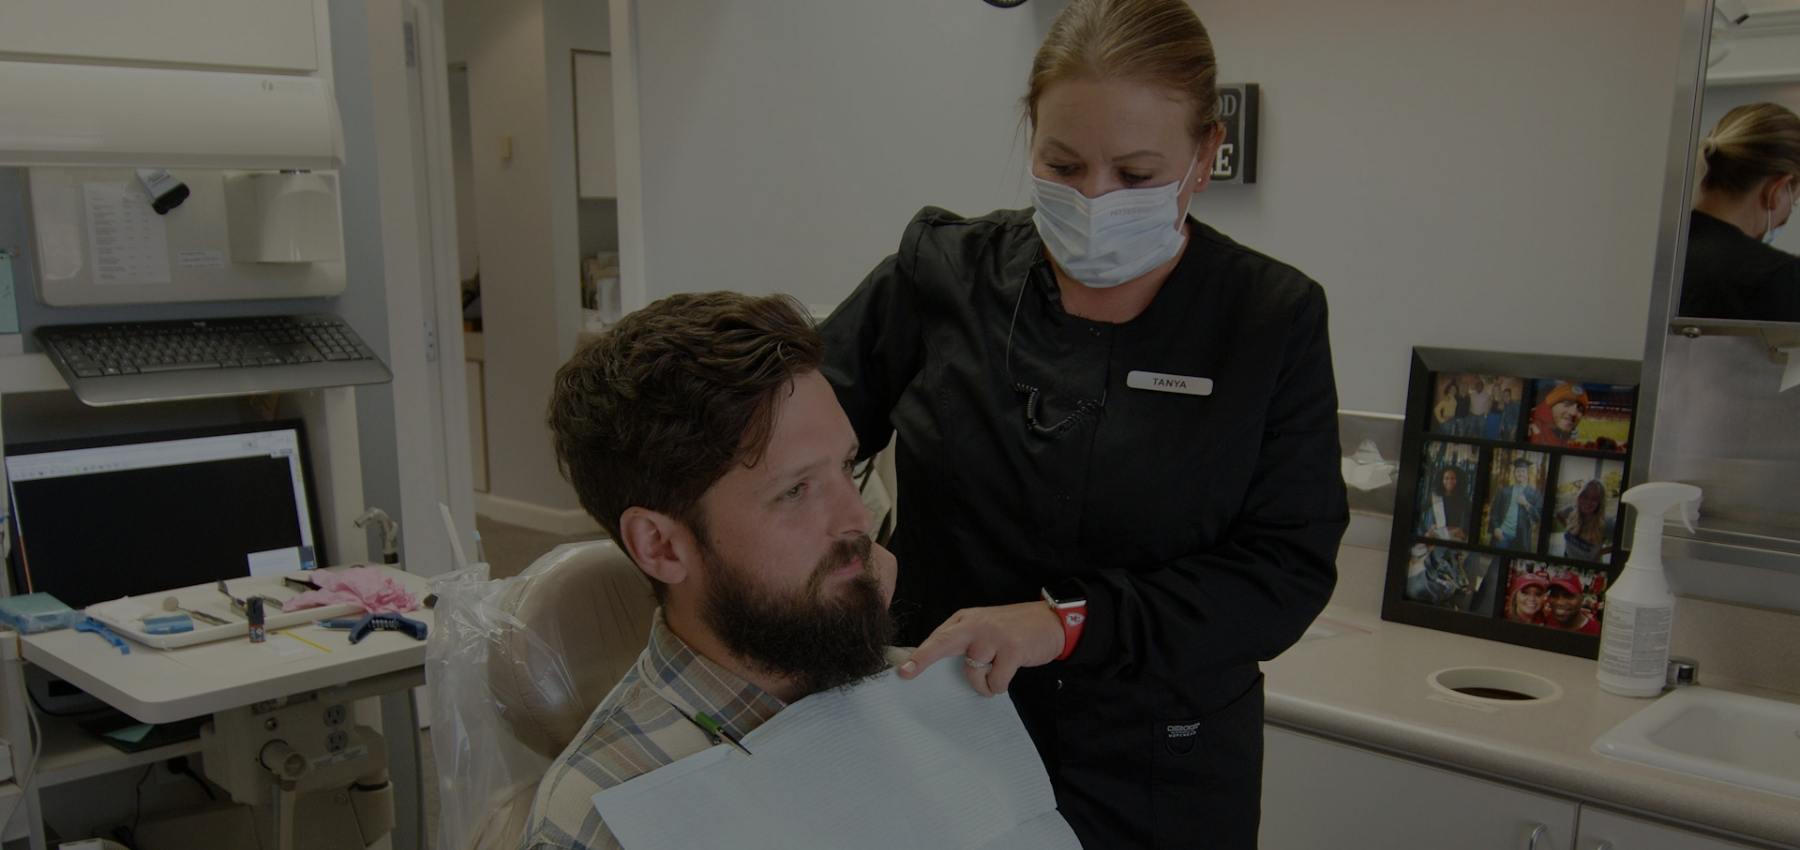 Dental team member placing protective sheet over patient's clothes